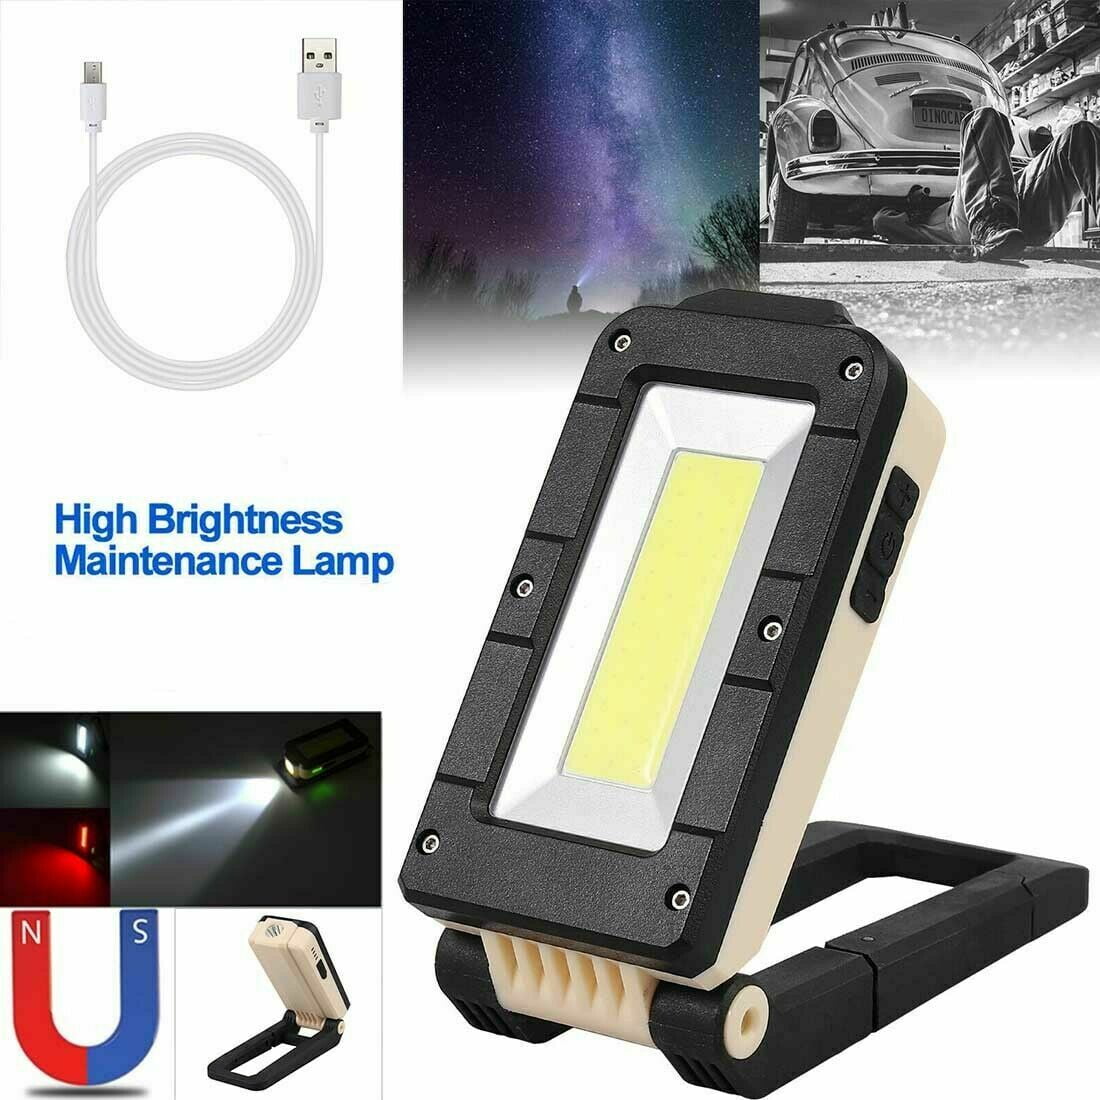 Aain LT001 LED Worklight Retractable Portable Rechargeable 120° Inspection Ultra Bright USB Charging Magnetic Base and Rotating Hook for Camping Car Truck Repair Travelling Blackout Emergency